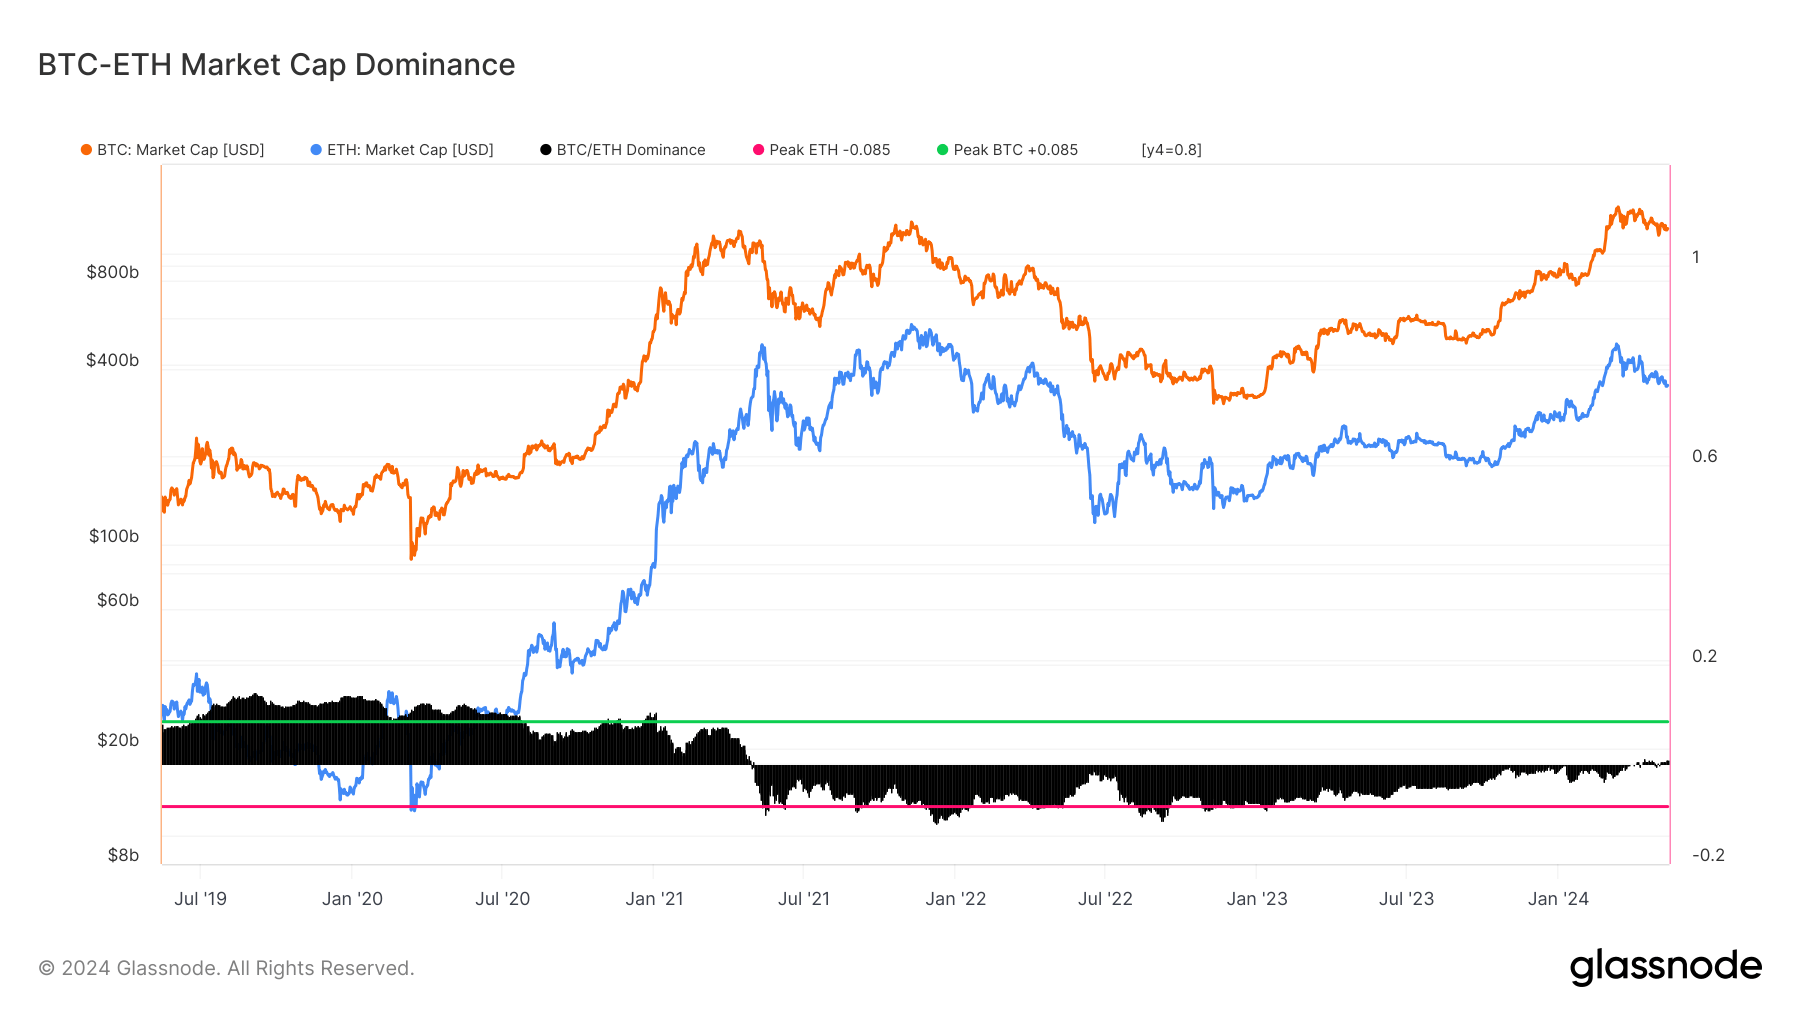 The ratio of ETH to BTC has decreased by 30% compared to last year, while Bitcoin’s market dominance is increasing.